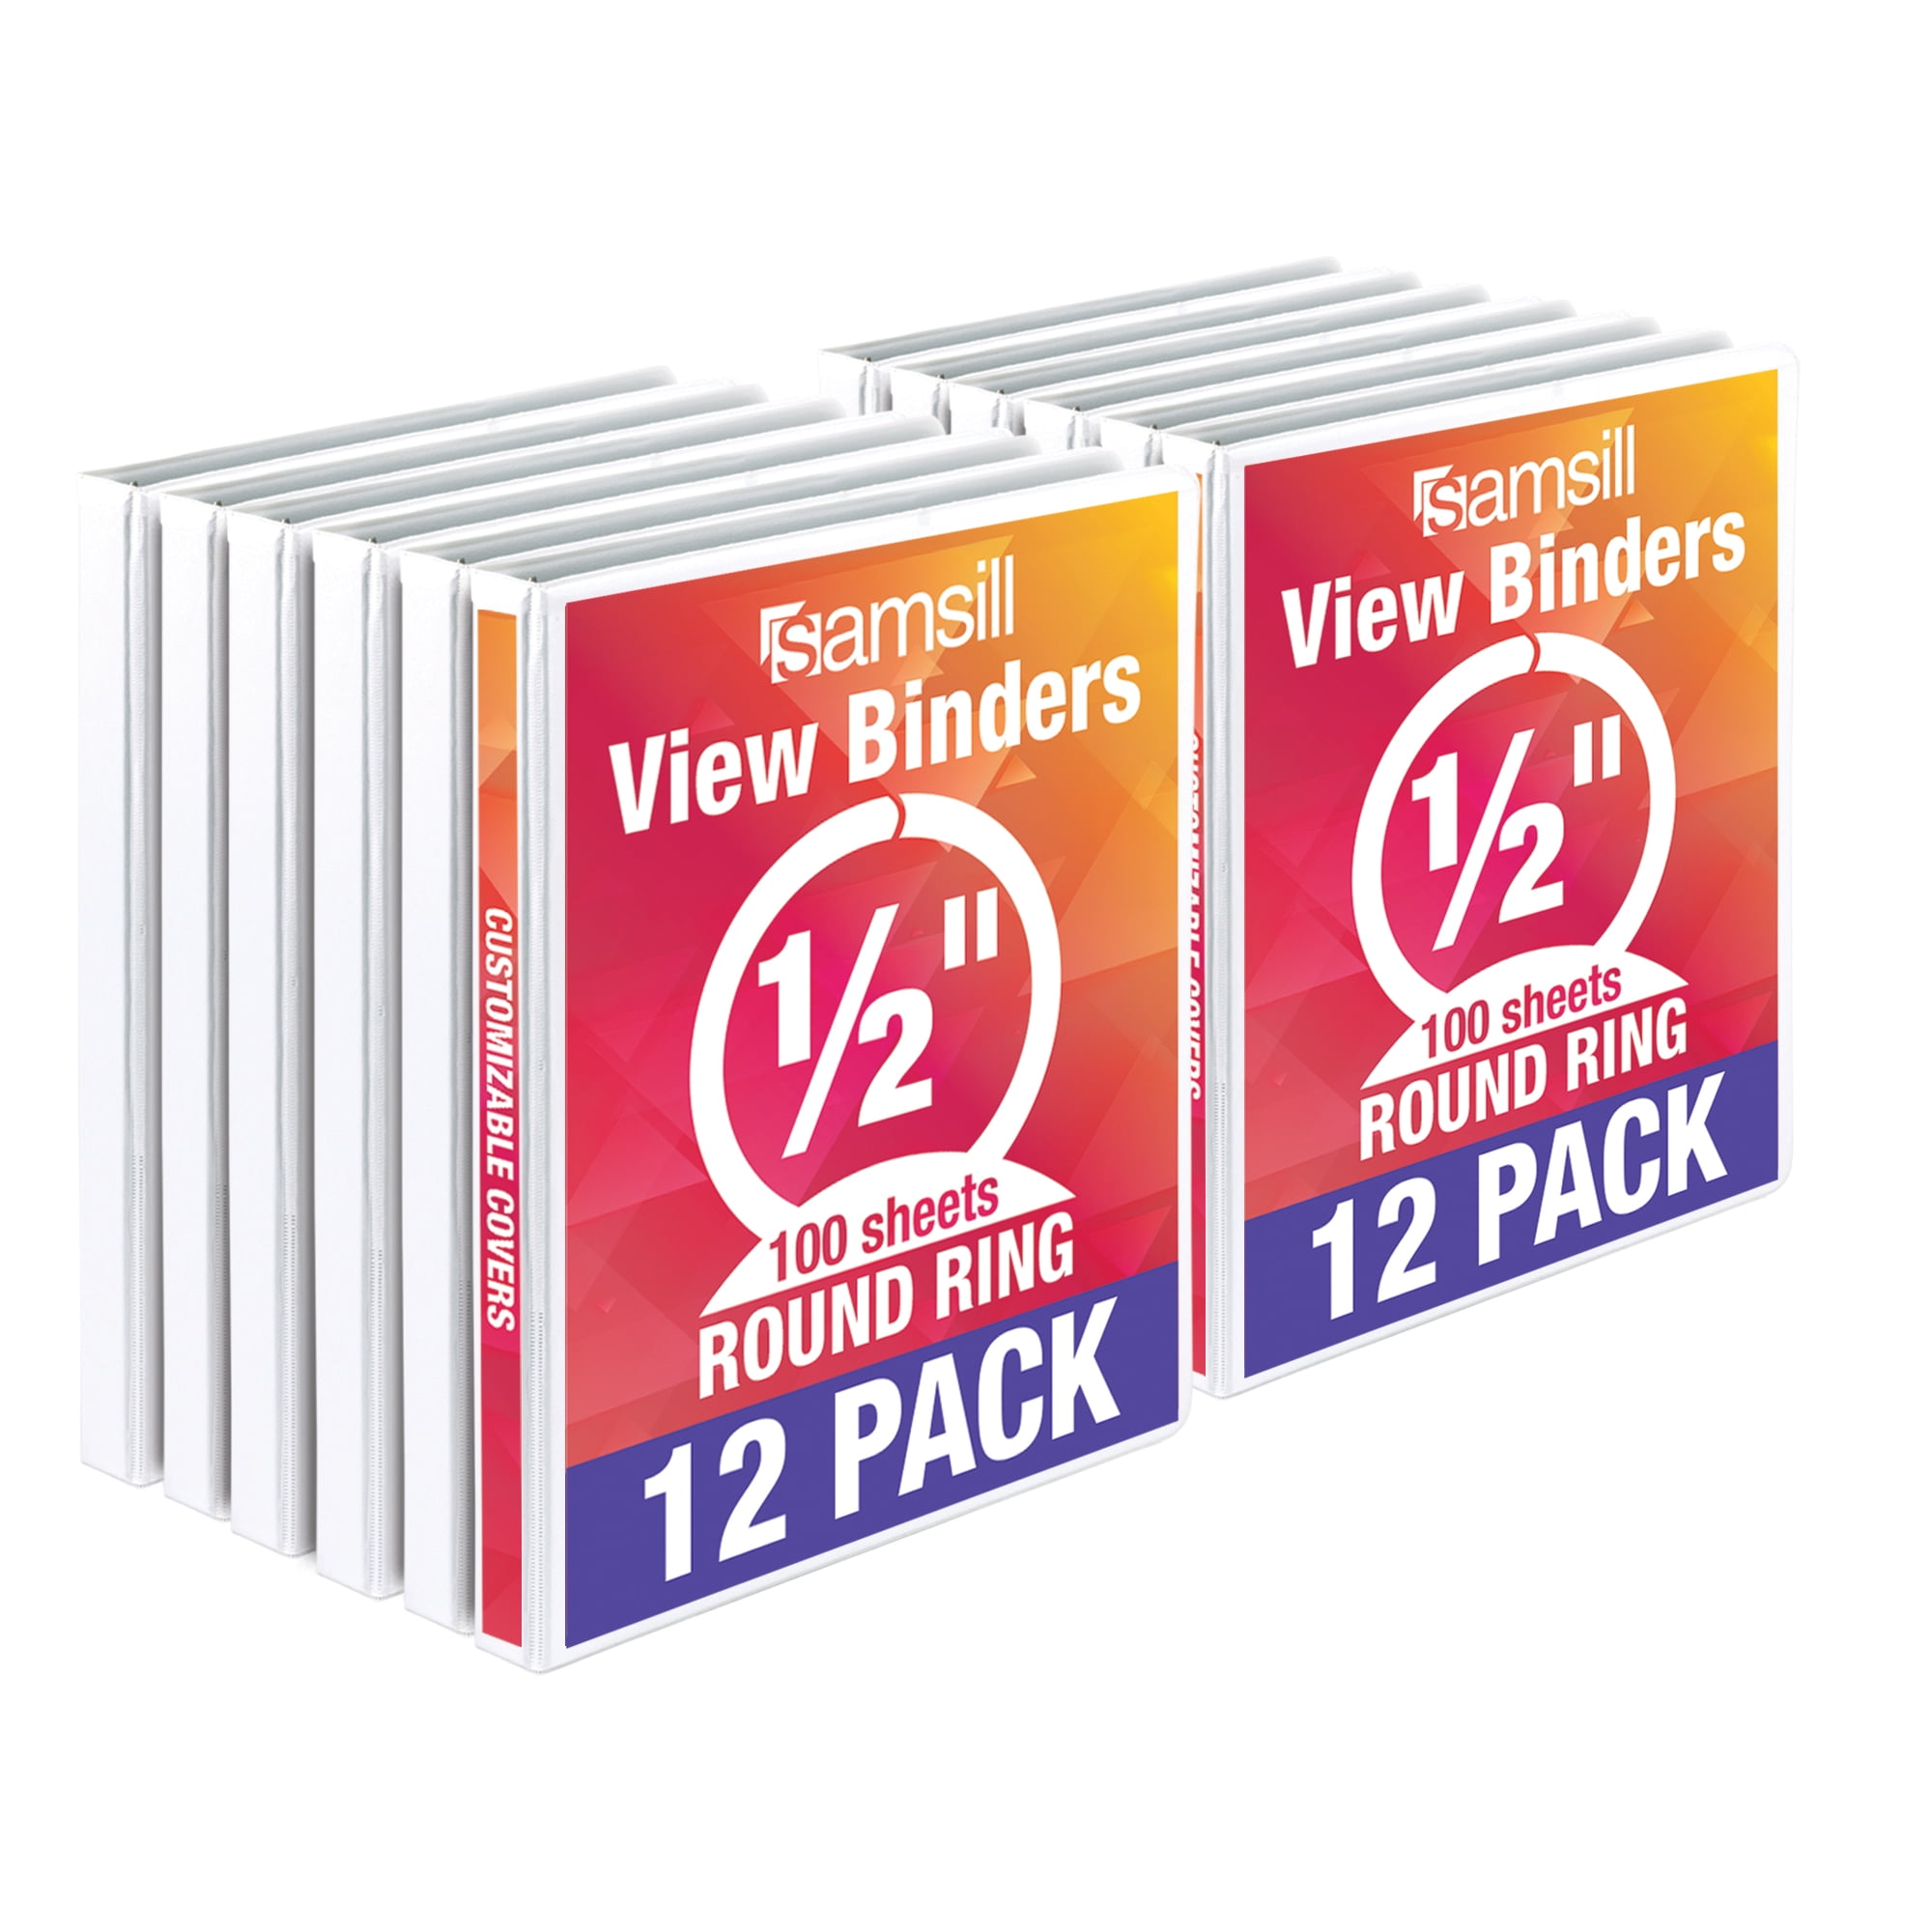 I08517c 0.5 In. Economy View Binder - White, Pack Of 12